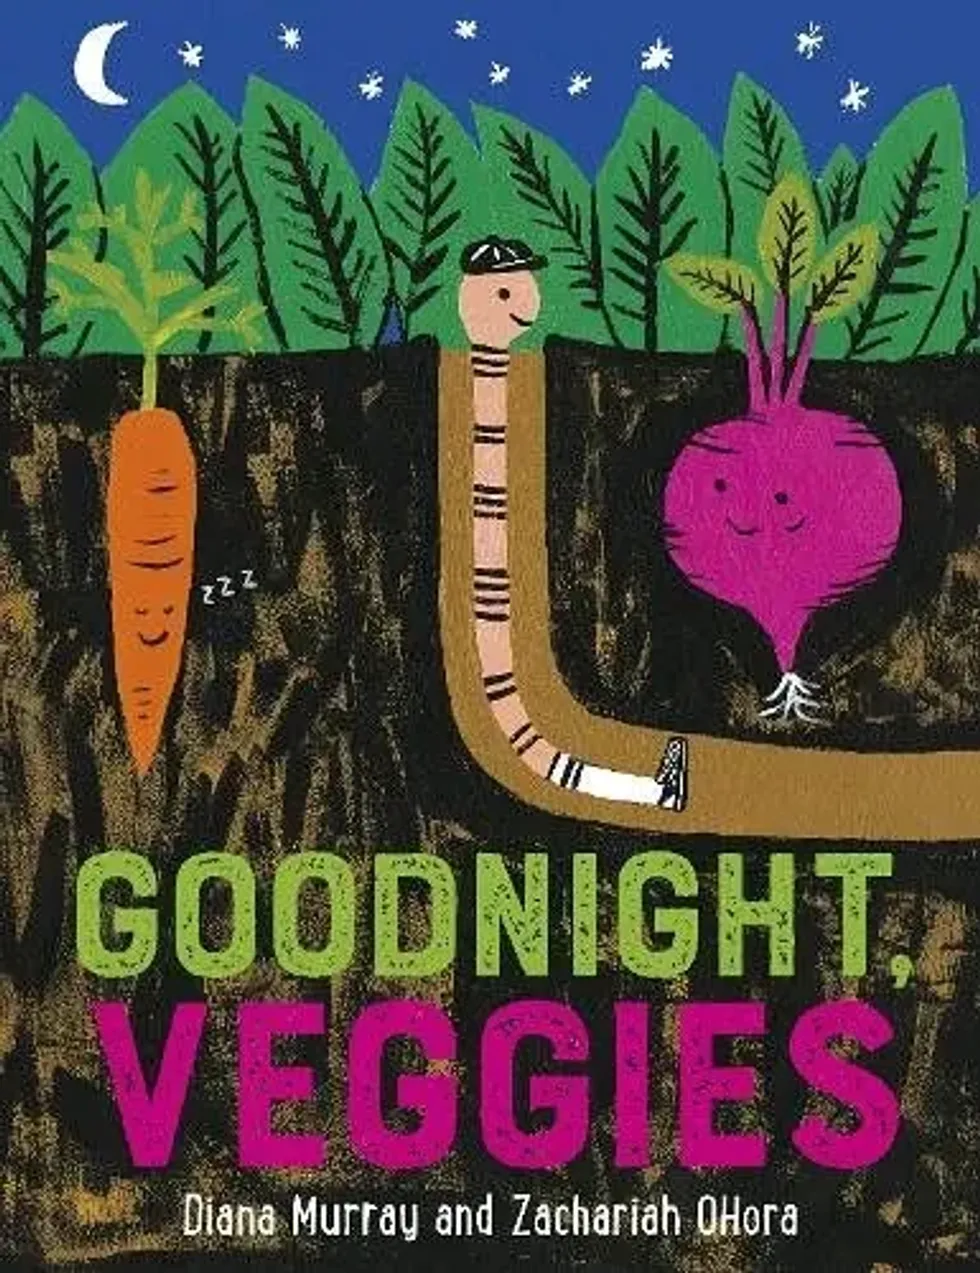 Cover of 'Goodnight, Veggies' by Diana Murray.